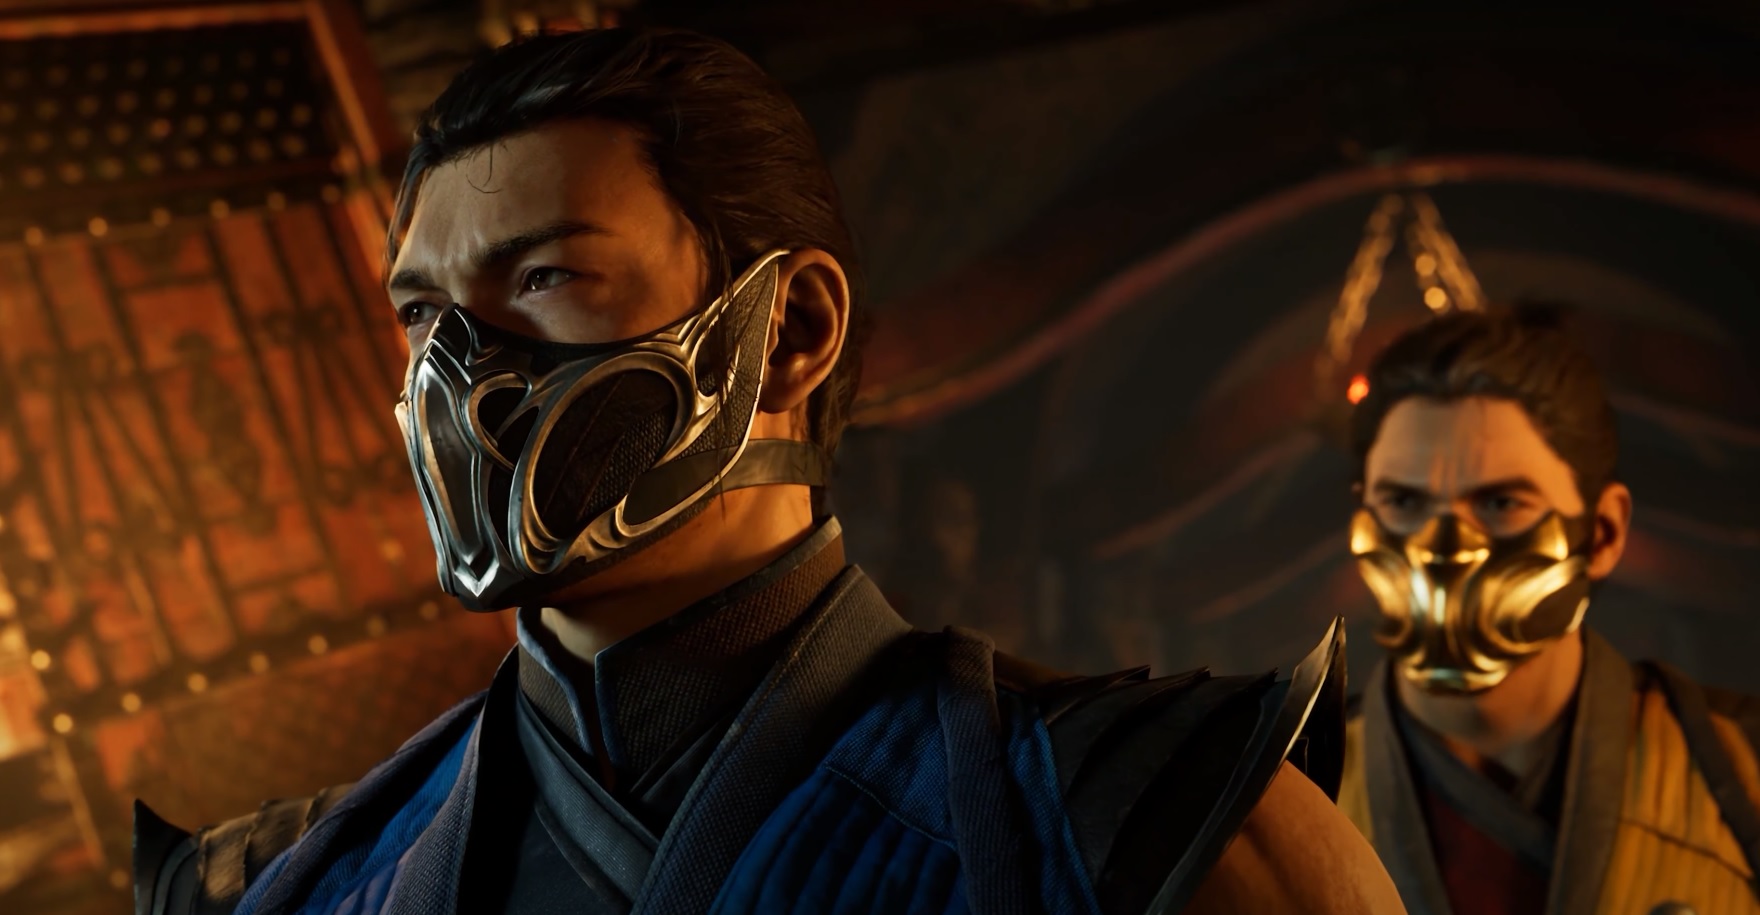 Mortal Kombat 1 launches tomorrow but without crossplay multiplayer support  - Neowin